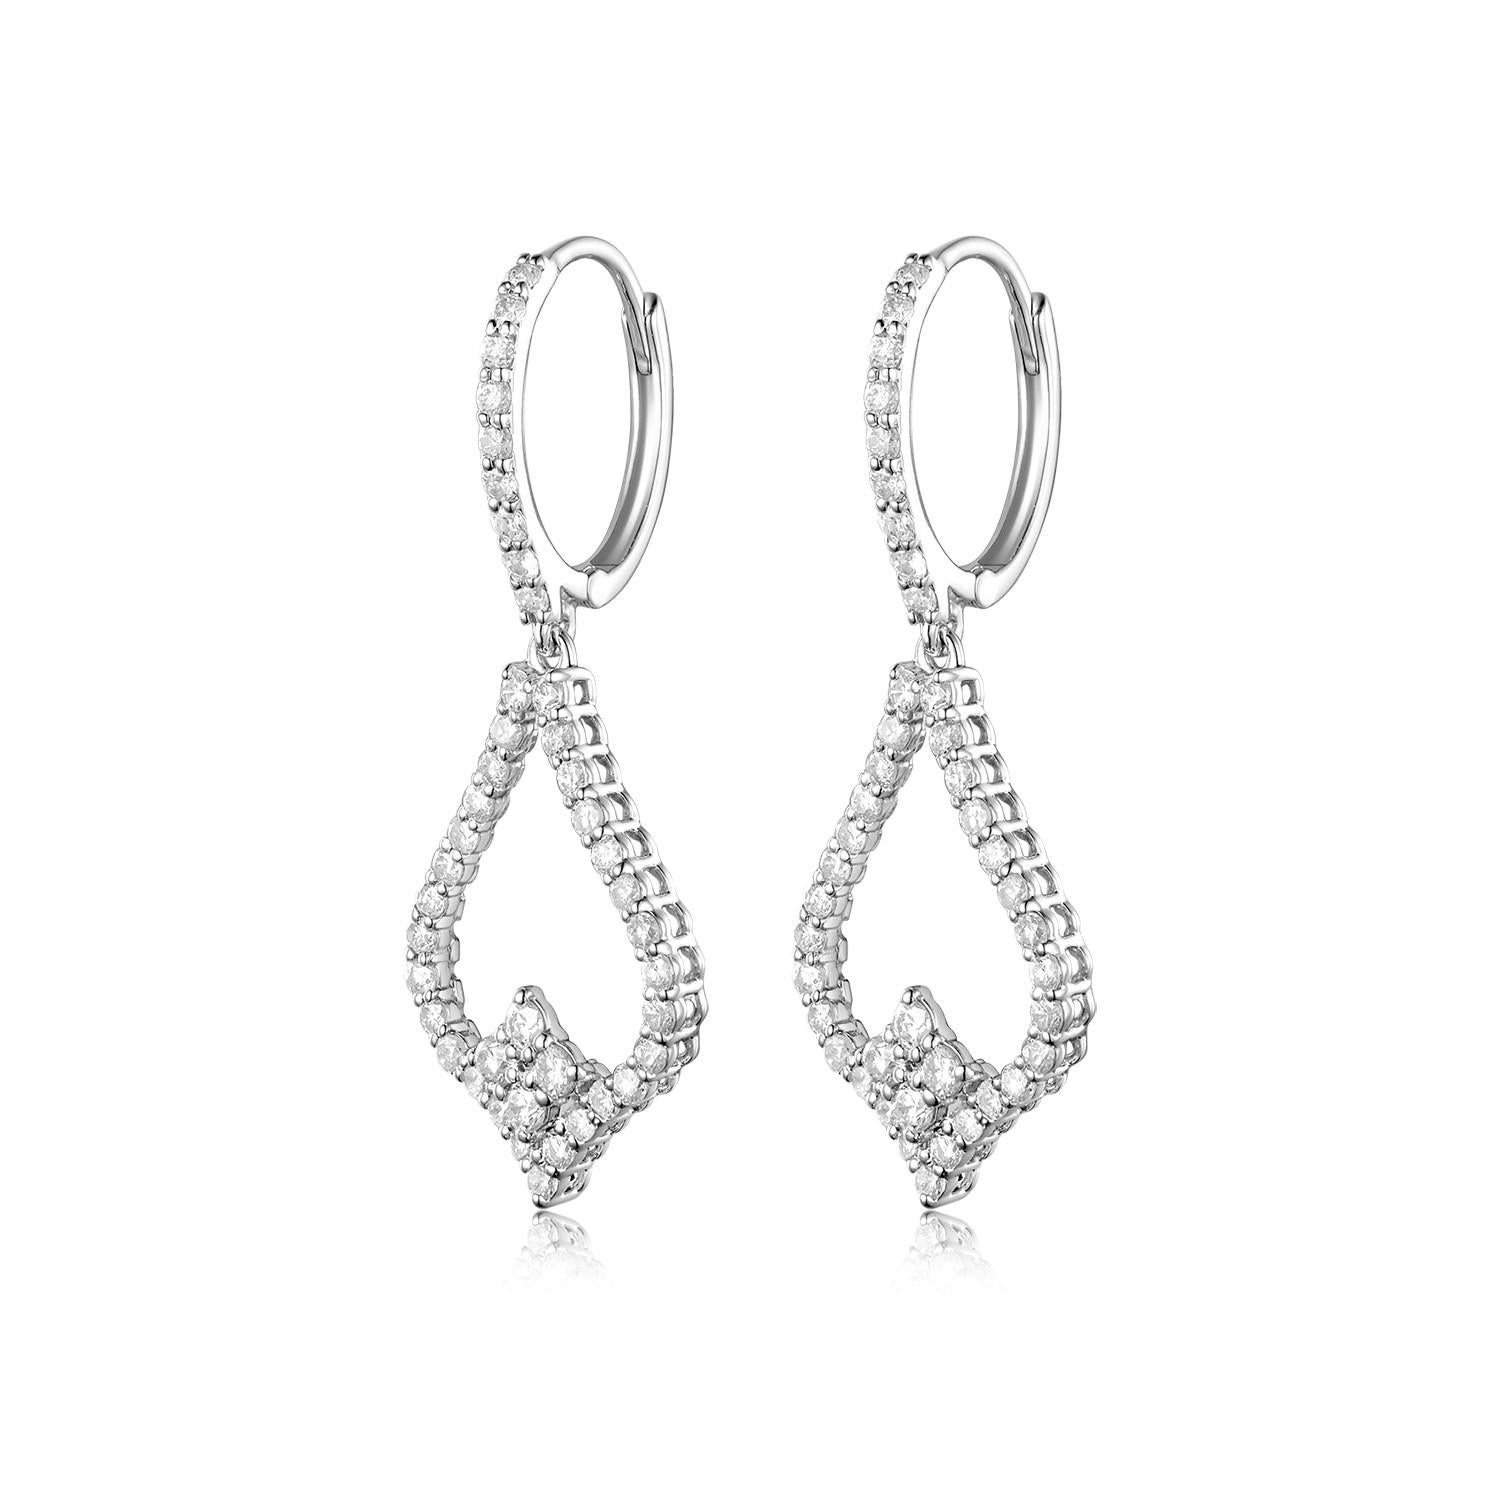 Elevate your jewelry collection with these sophisticated earrings, brilliantly crafted in gleaming 18 karat gold. At the heart of the design, shimmering round diamonds, weighing a total of 0.74 carats, take center stage, exuding timeless elegance